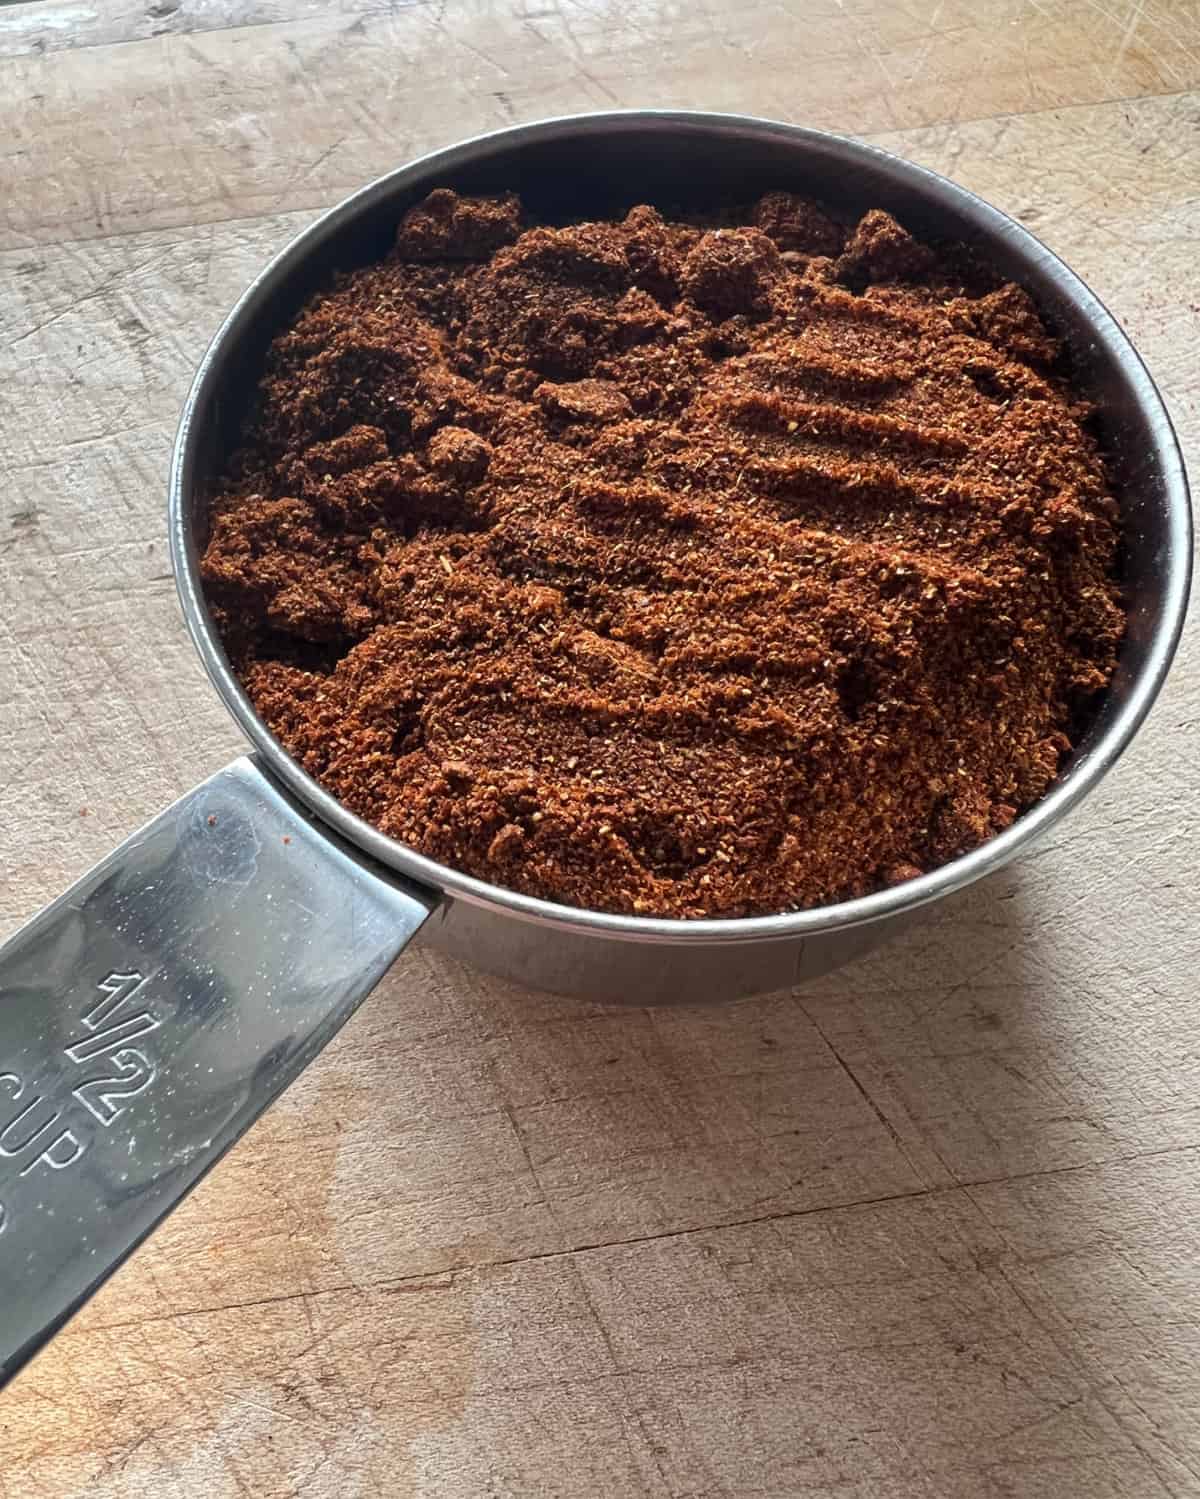 ½ cup measuring cup of ancho Chile powder